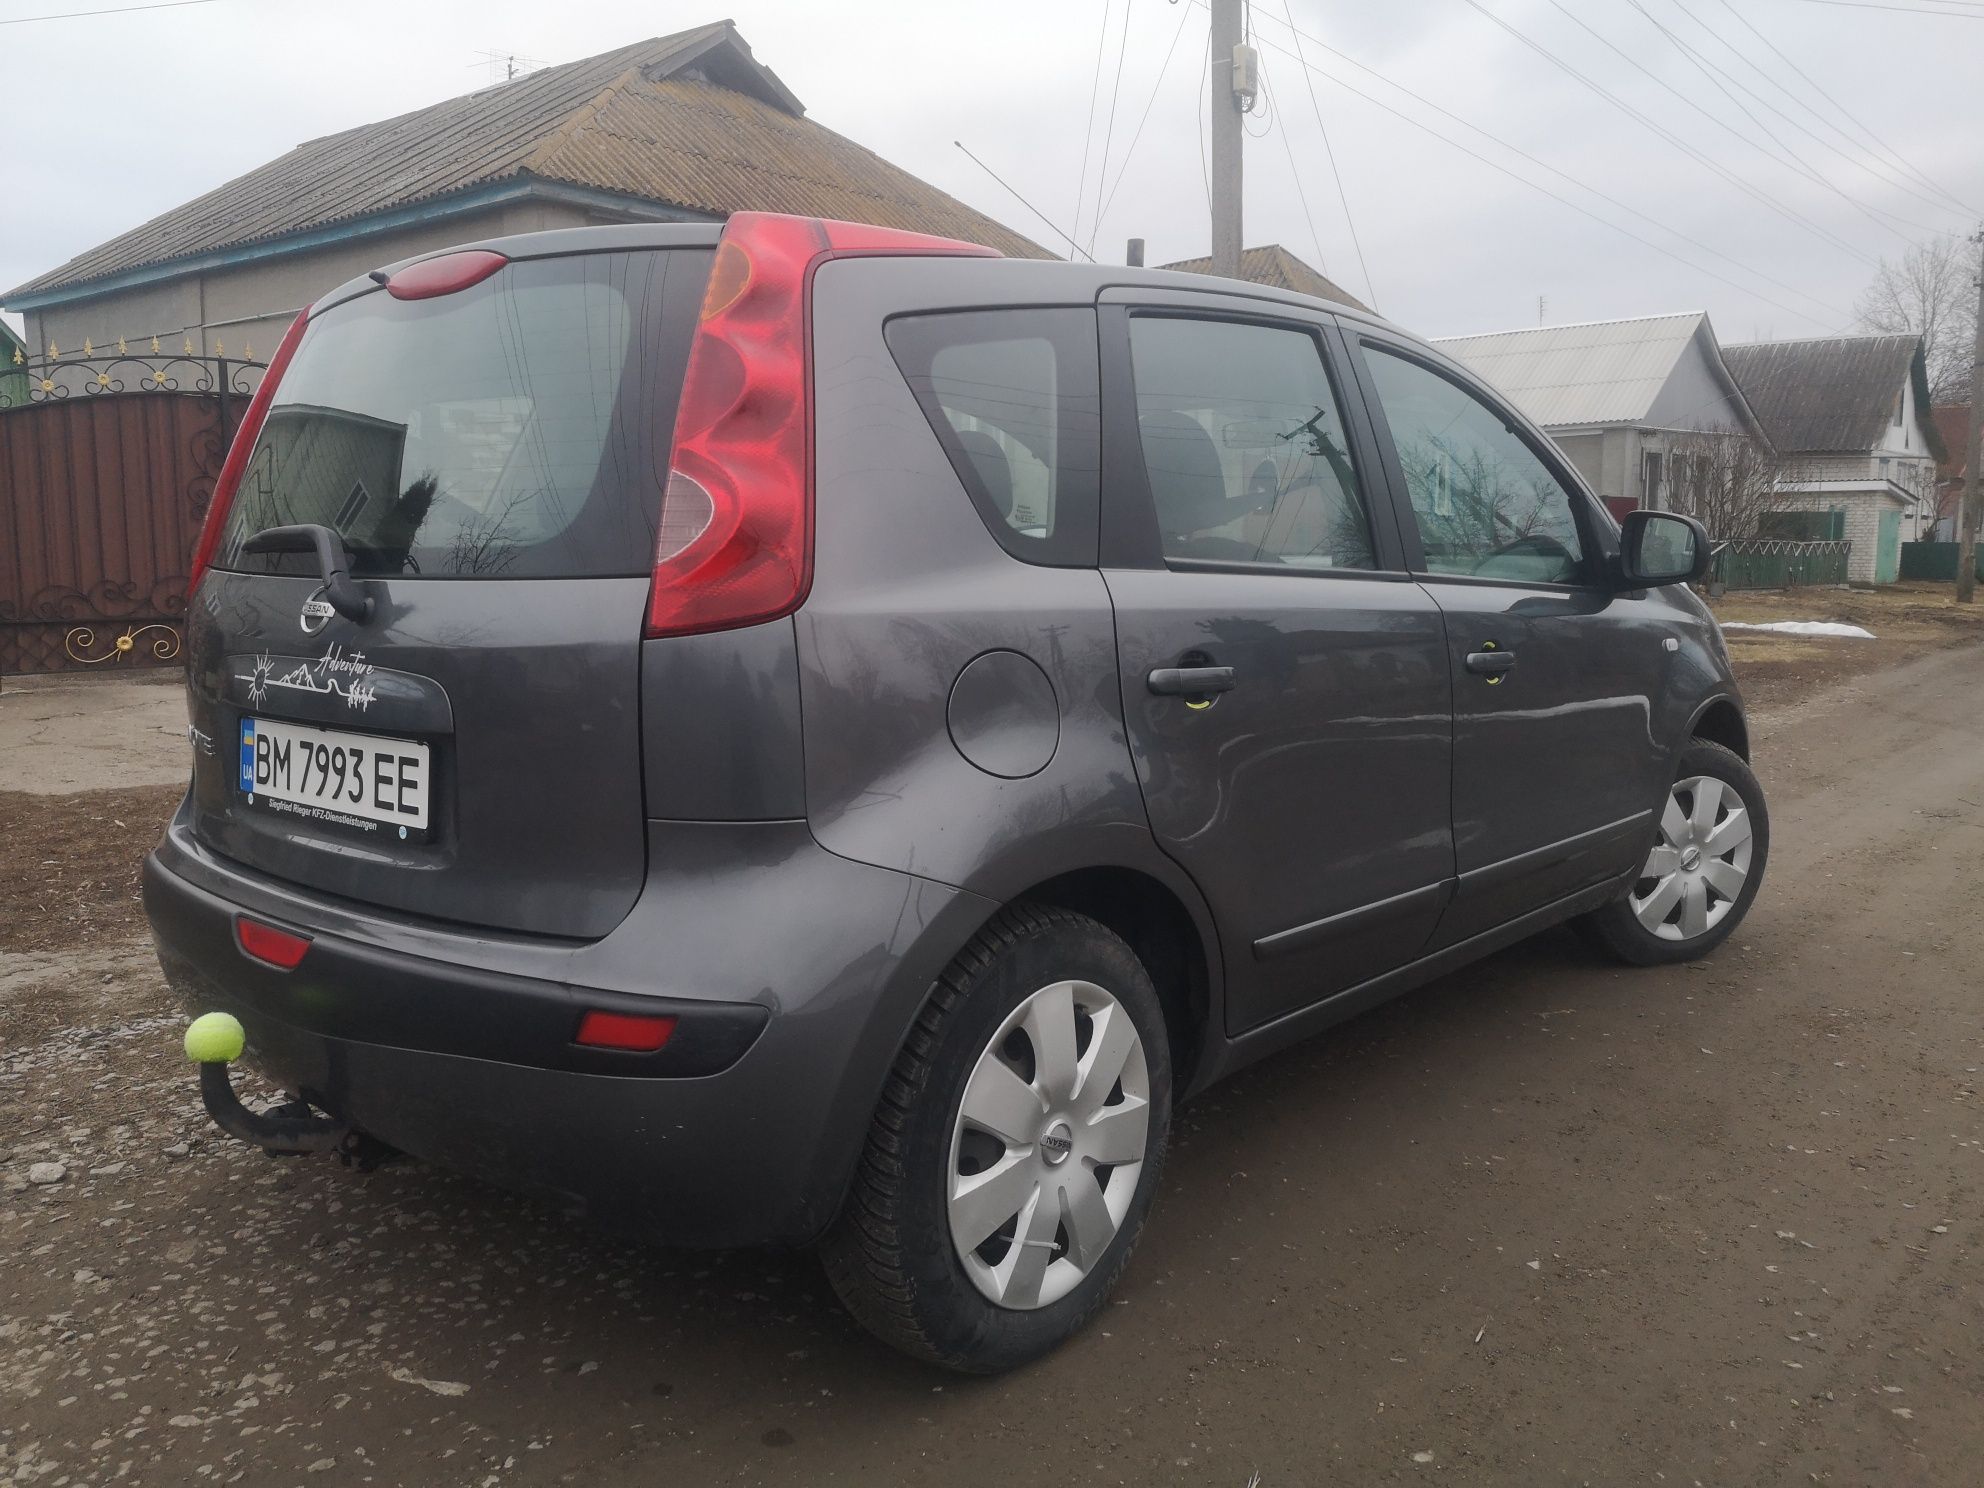 NISSAN NOTE 1.4 2006